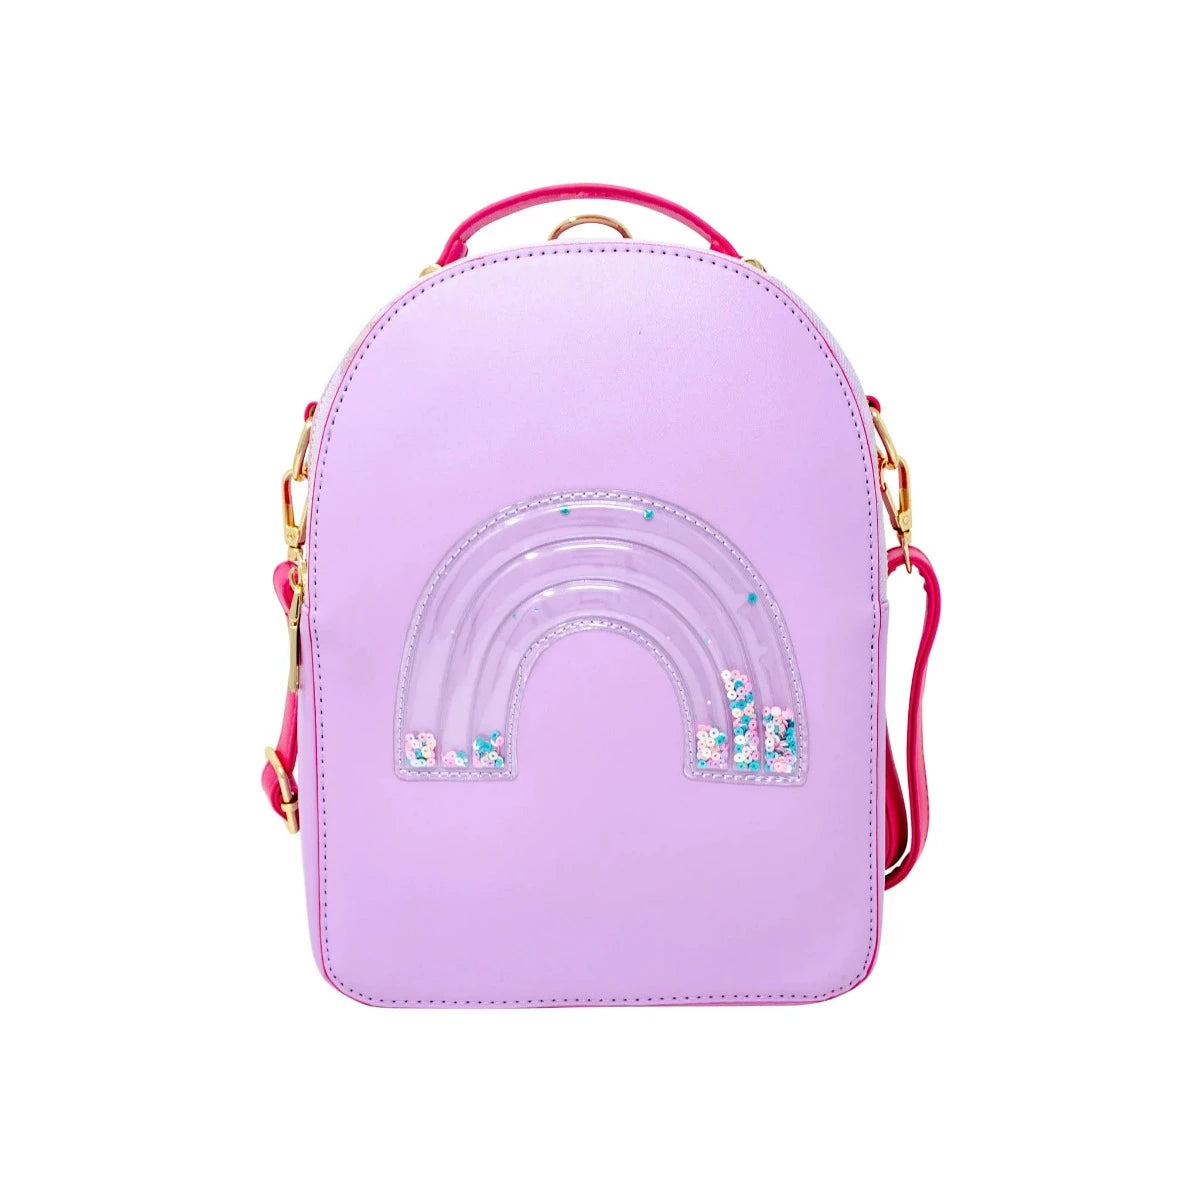 Confetti Backpack - Purple-Handbags-Tiny Treats and ZOMI GEMS-LouisGeorge Boutique, Women’s Fashion Boutique Located in Trussville, Alabama